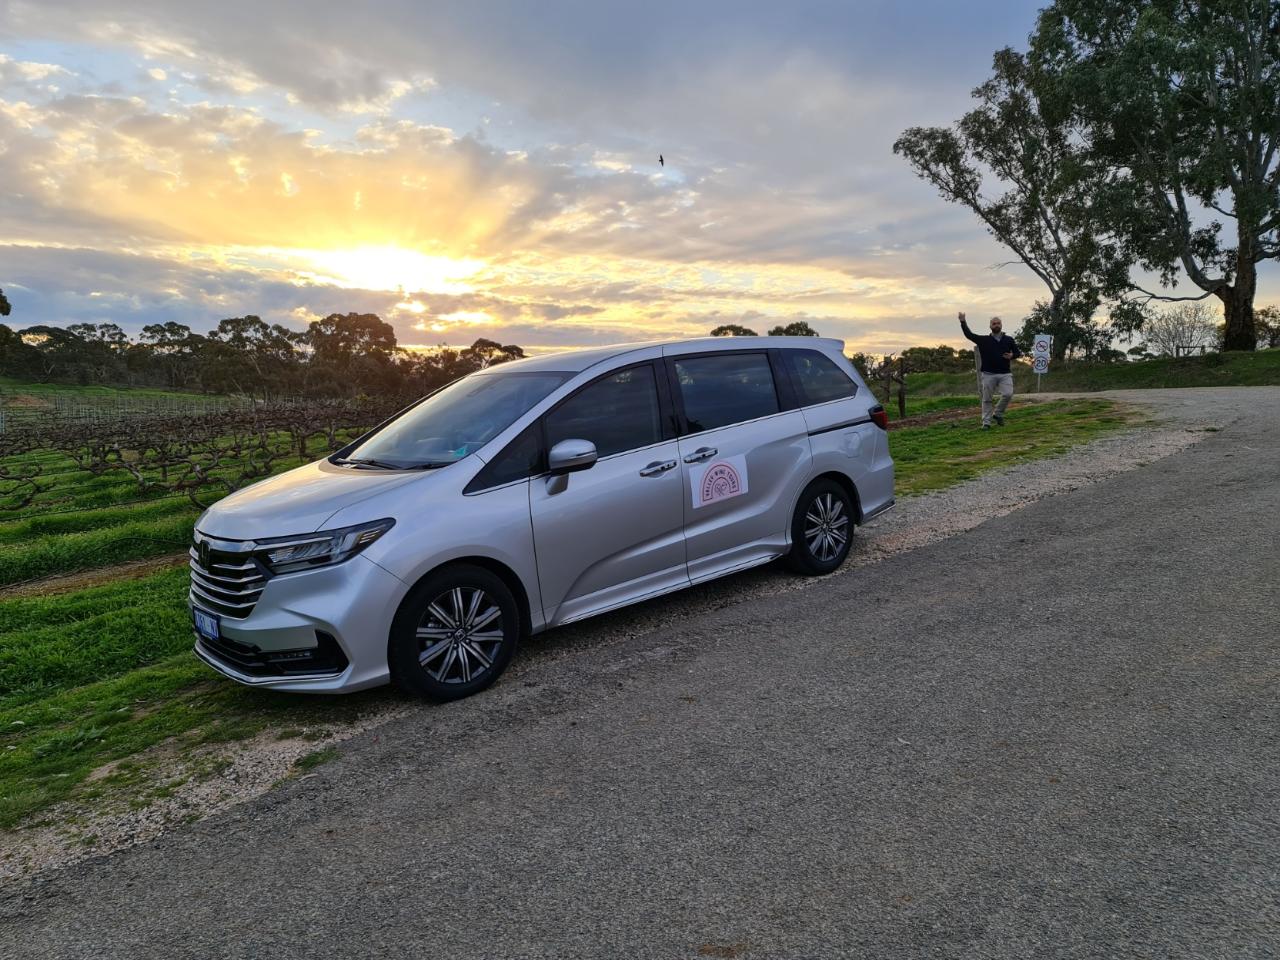 The Clare Valley Wine Tour